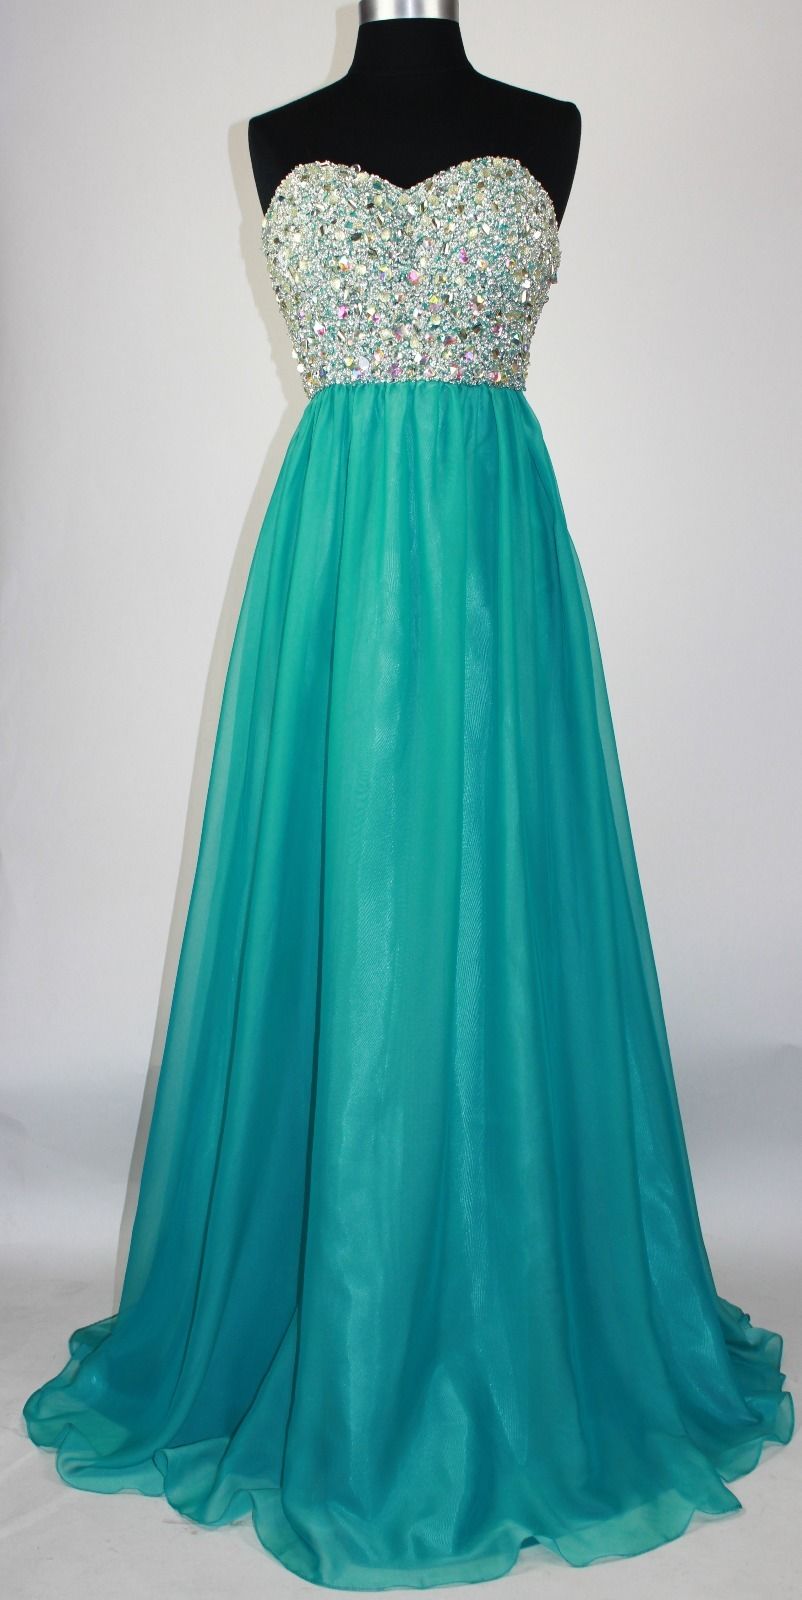  Long Teal A-Line Beaded Prom Dresses Featuring Beaded Sweetheart Neck,Long Elegant Prom Dresses